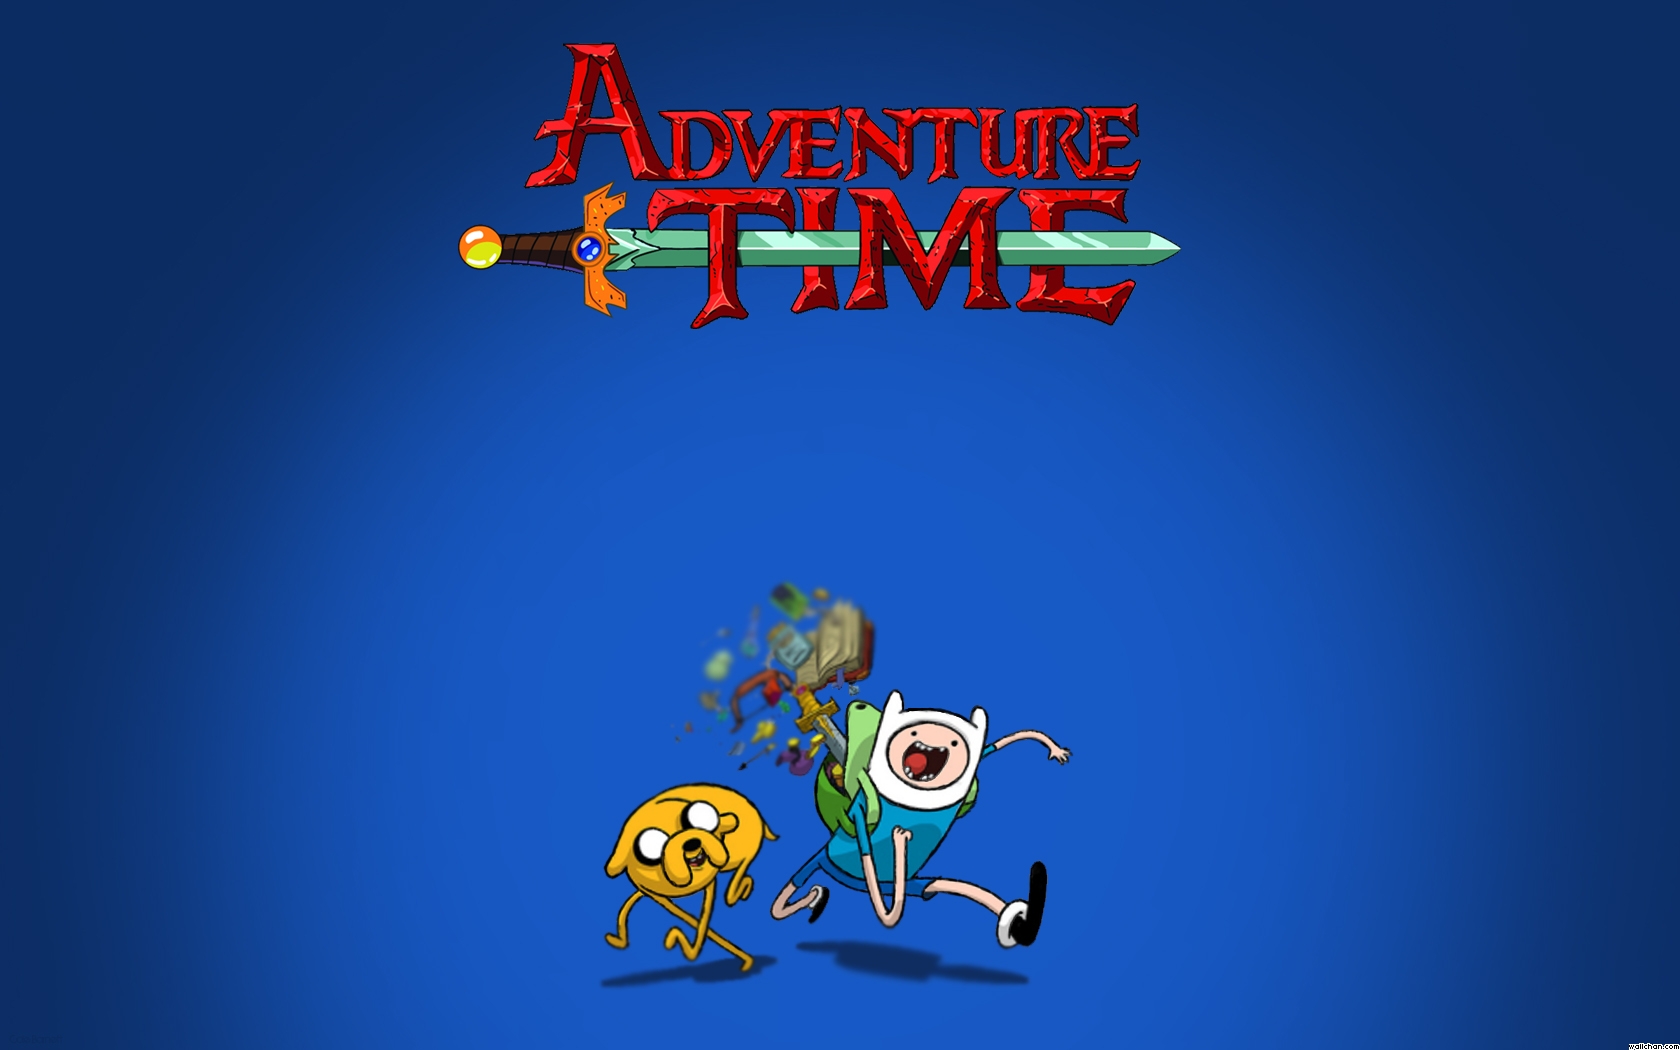 Adventure Time Res: 1680x1050 / Size:378kb. Views: 310945